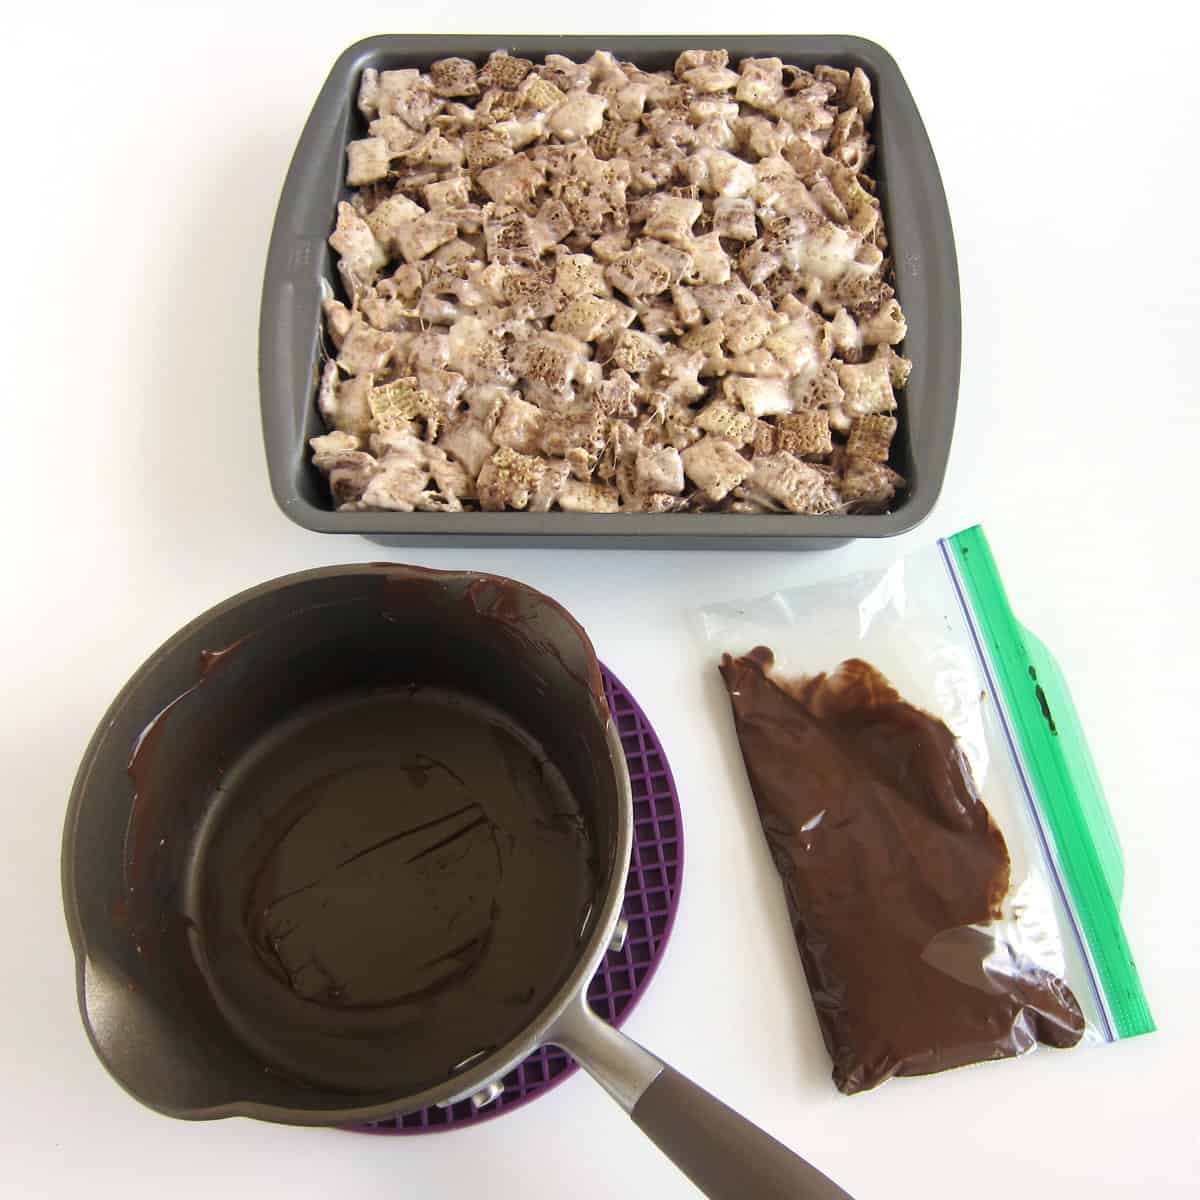 melted chocolate and Nutella in a small zip-top bag next to the empty pan and the pan of Chocolate Chex Bars